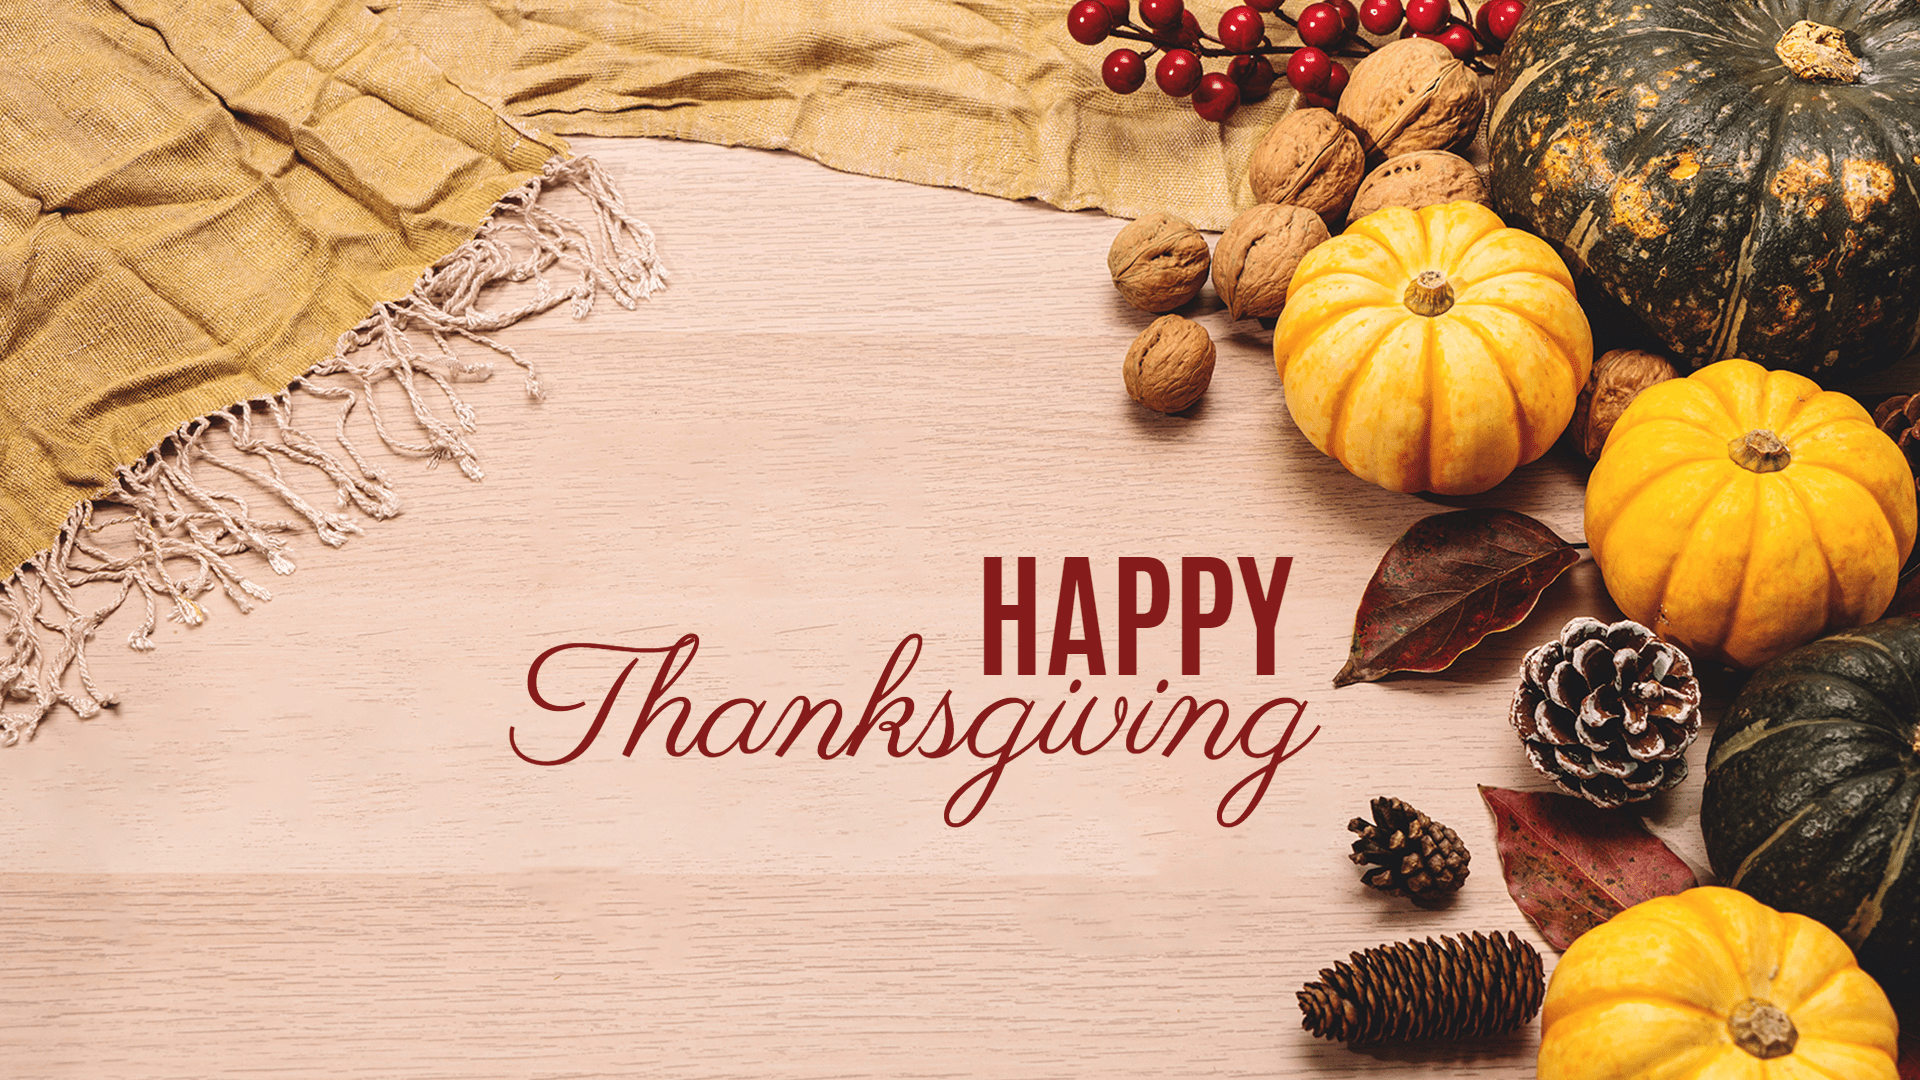 Thanksgiving Wallpaper & Background for Your Holiday Celebration 2022